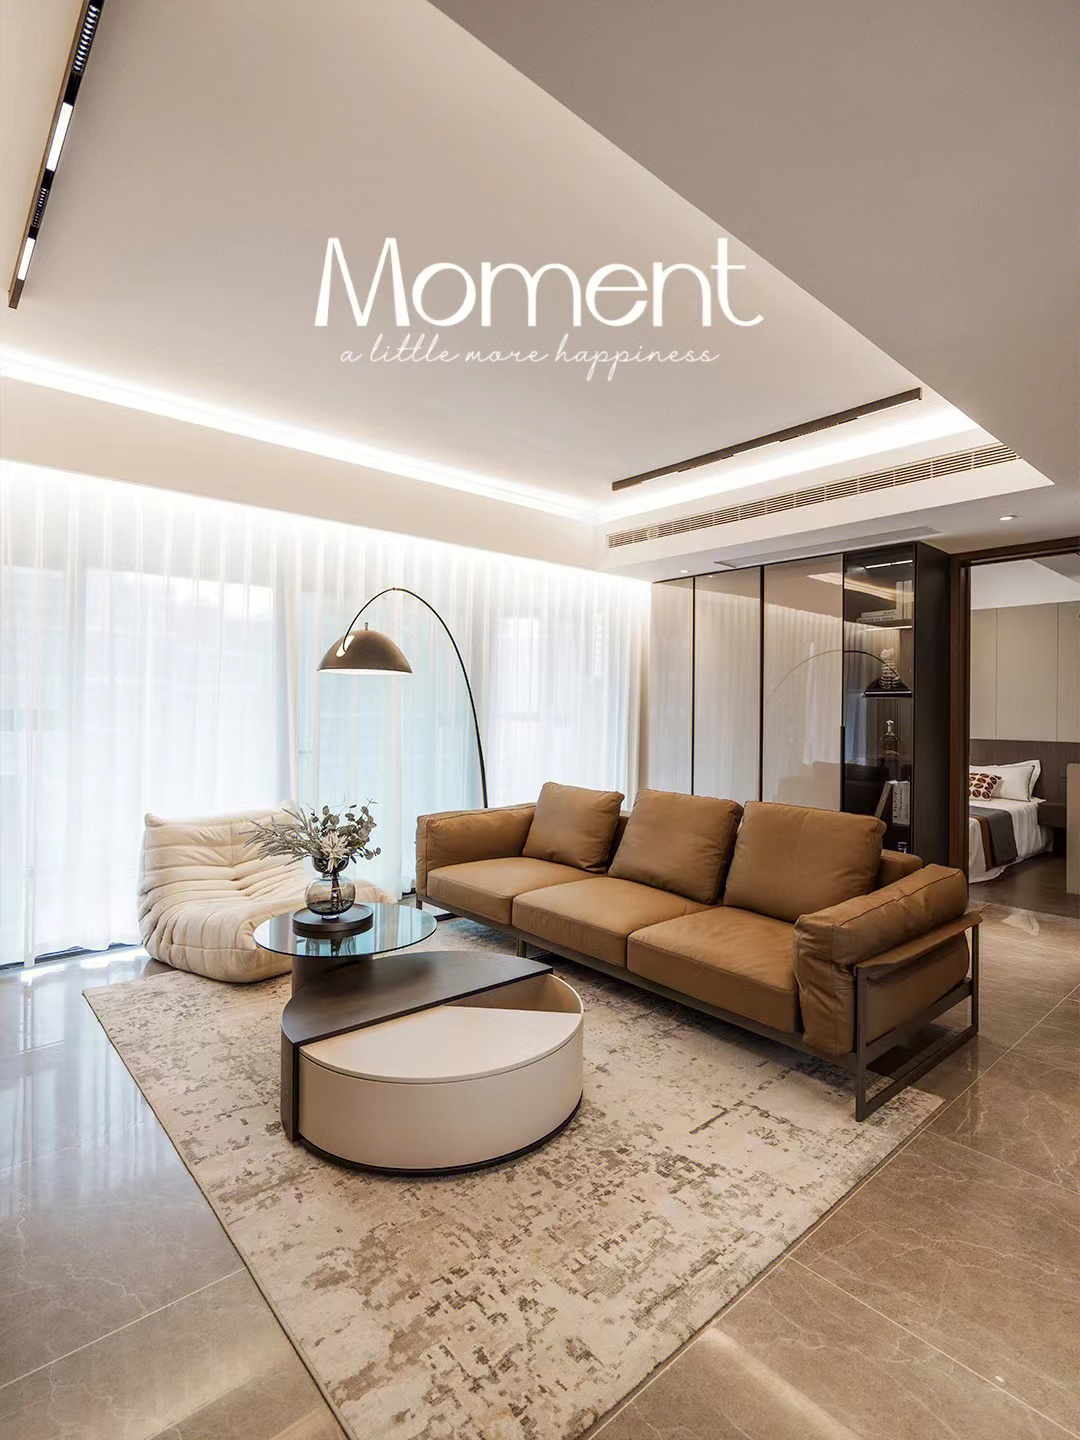 145㎡ minimalist soft outfit, for the ideal home into a high-level sense